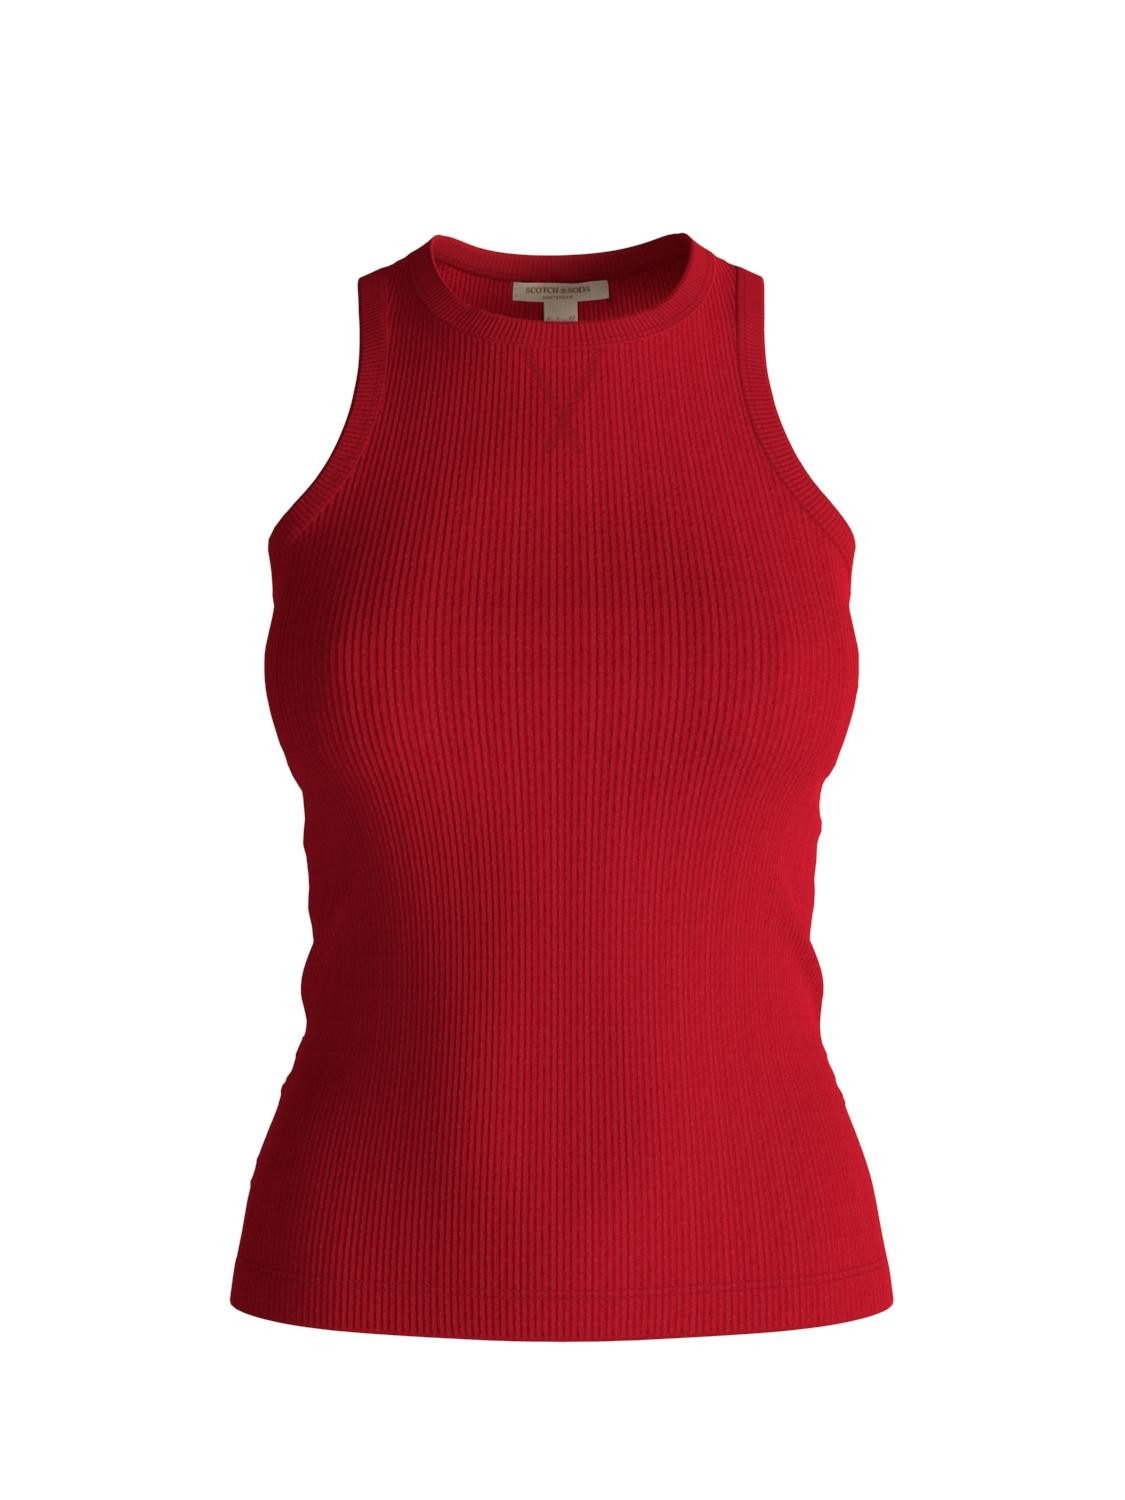 Scotch & Soda T-Shirt Cotton in conversion racer tank, Amp Red